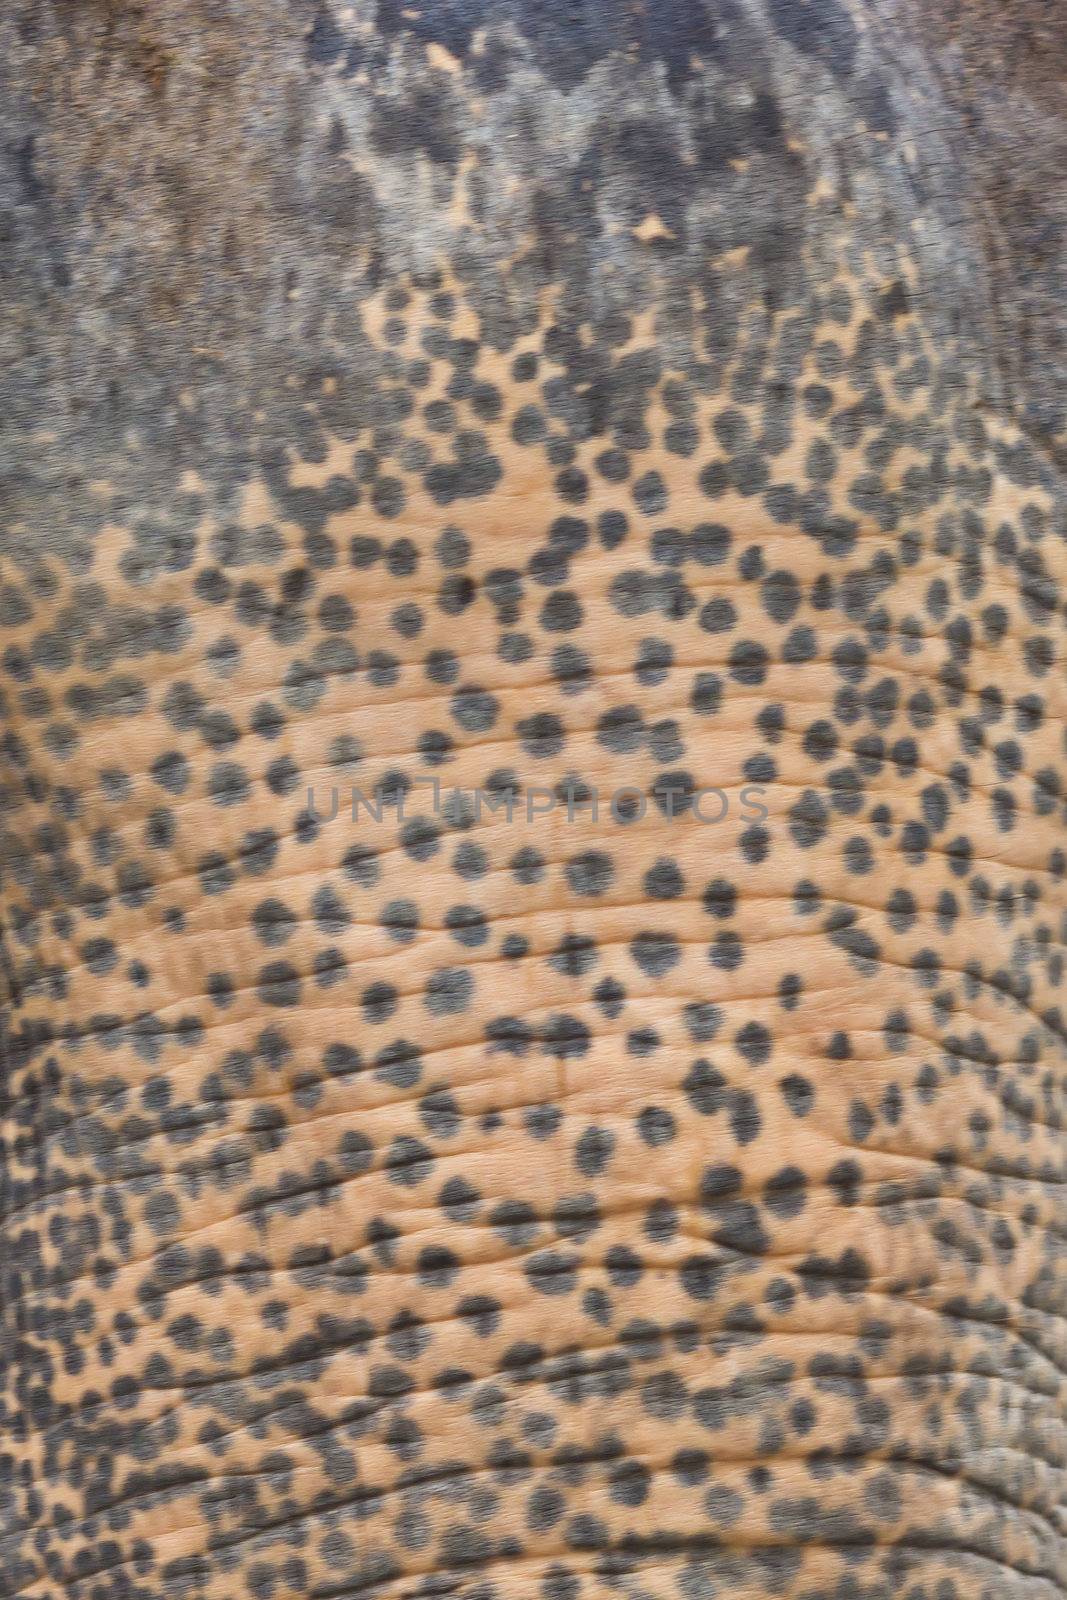 skin texture of elephant by tungphoto